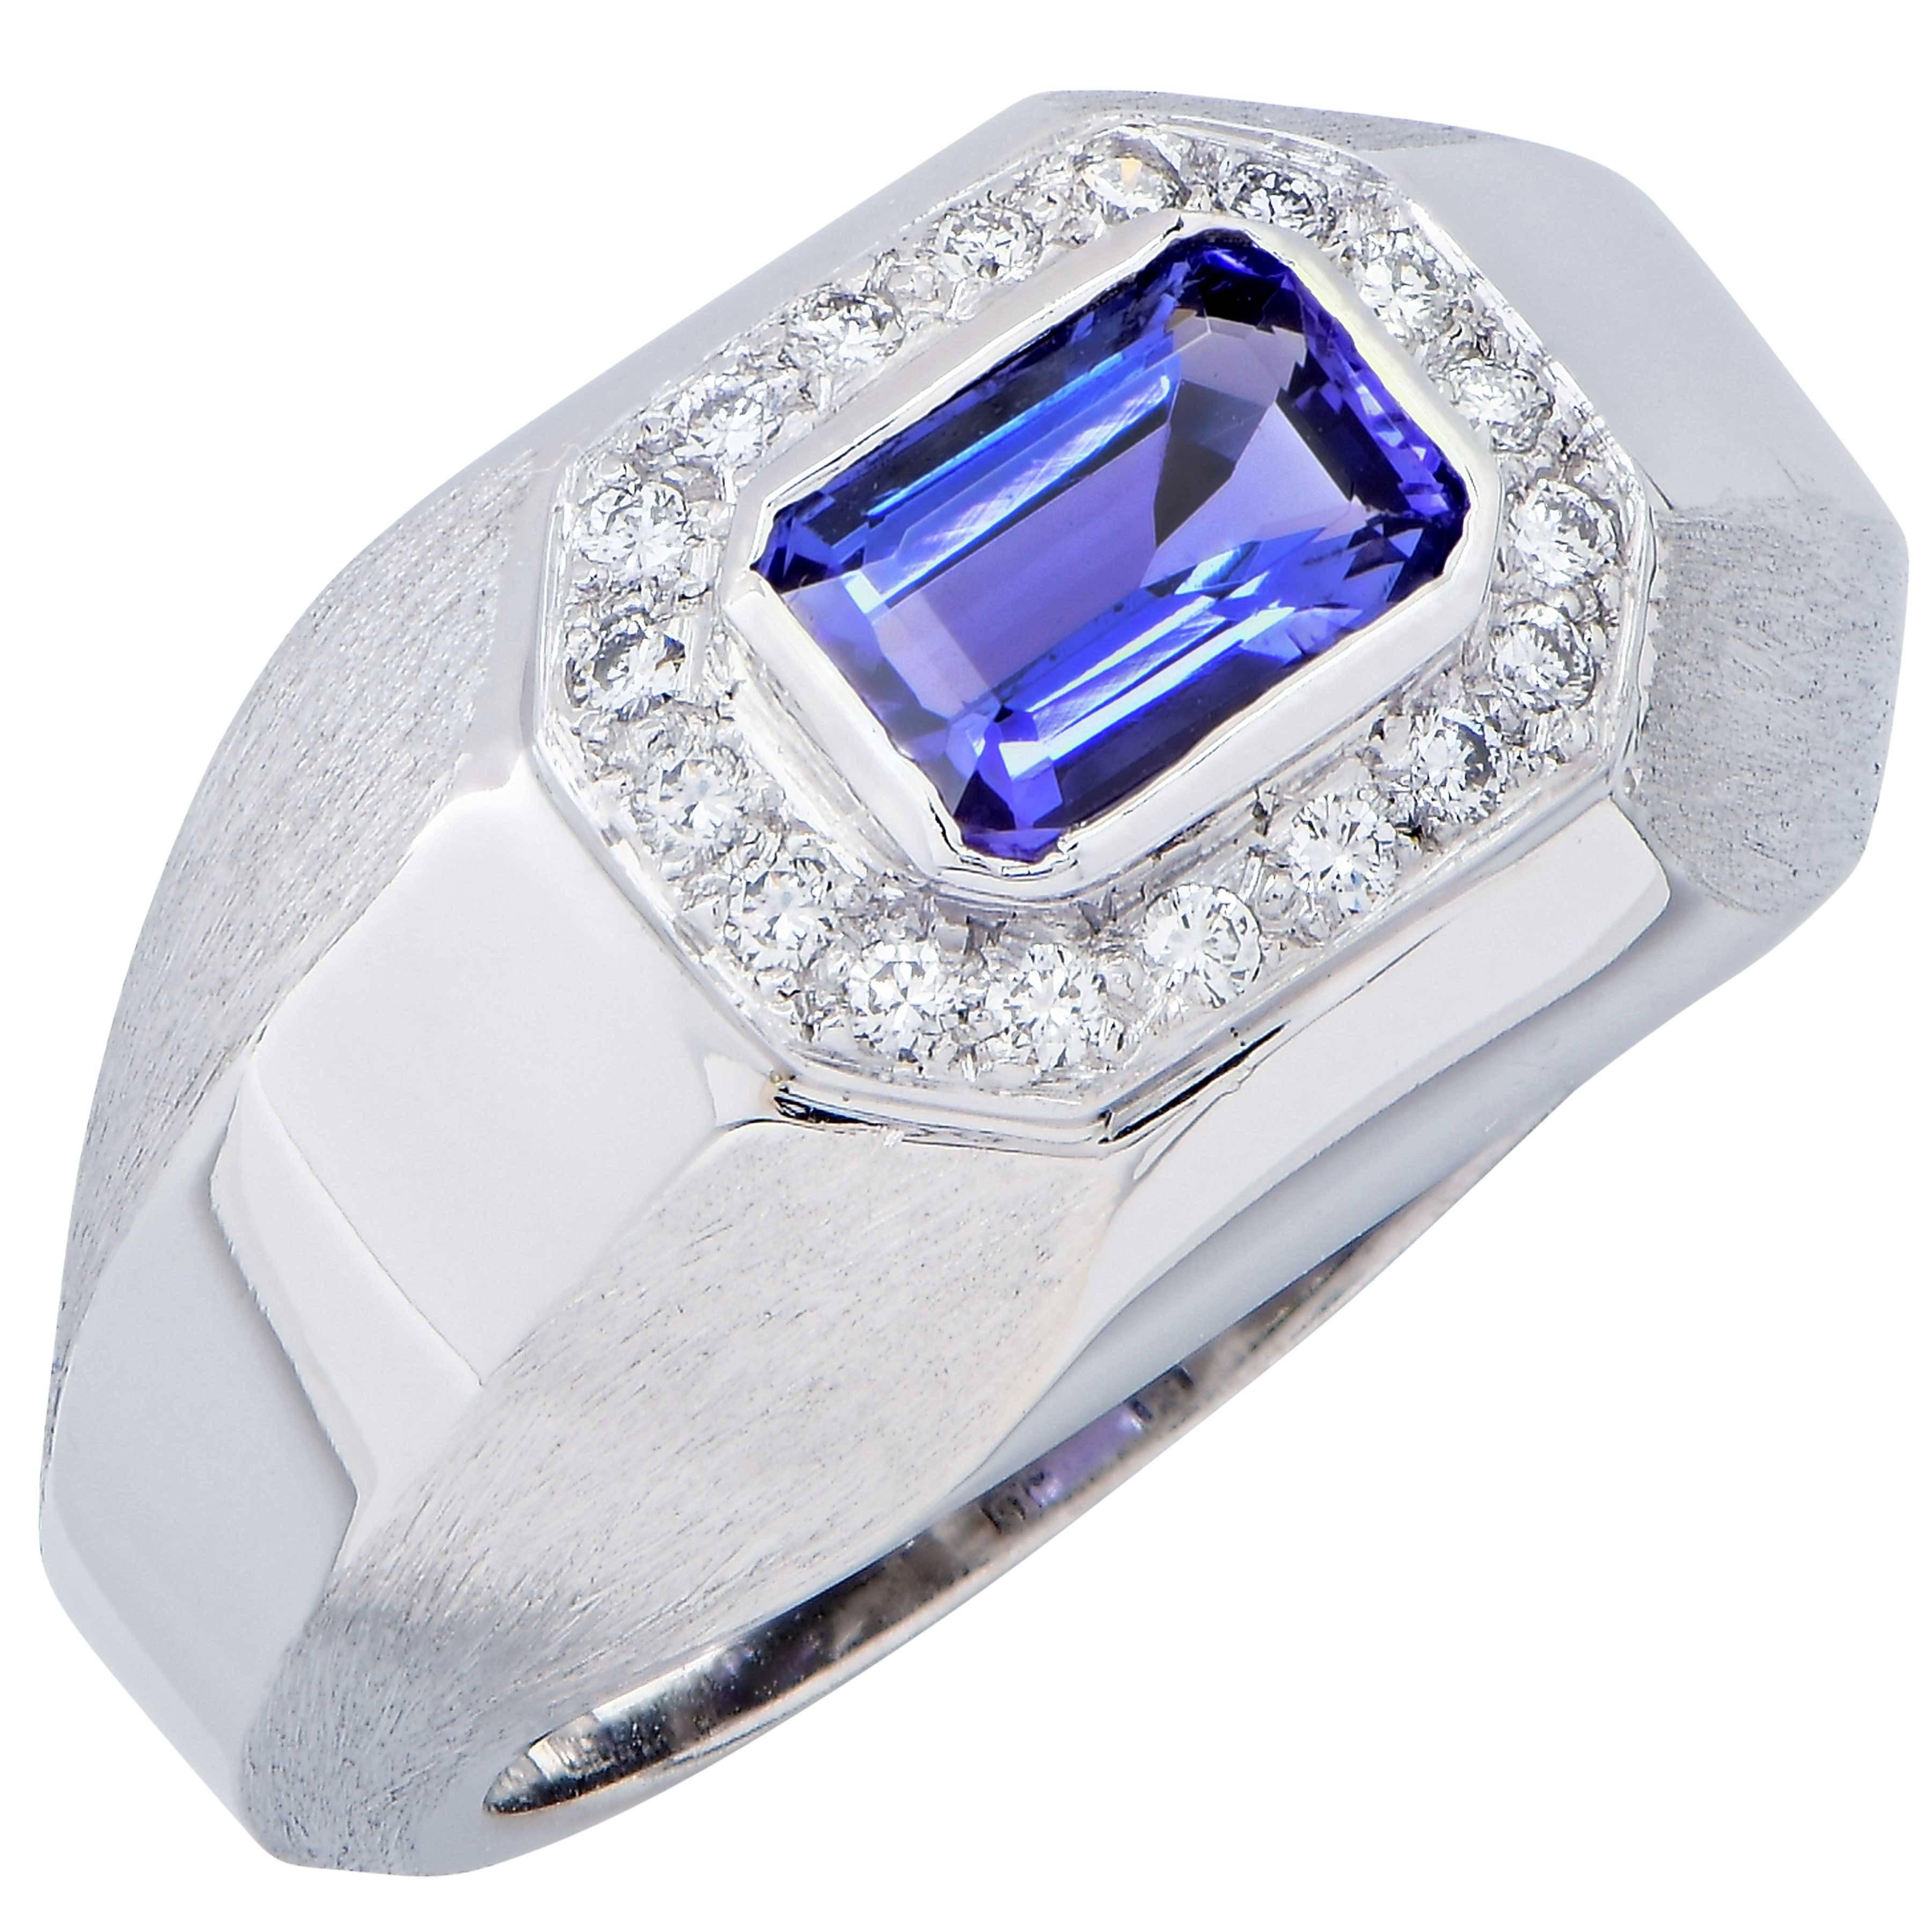 This elegant Tanzanite and diamond ring features an emerald cut Tanzanite weighing 1.15 carats and 18 round brilliant cut diamonds with a total weight of .20 carats.
Ring Size: 6 3/4 (can be sized)
Metal Type: 18 Karat White Gold
Metal Weight: 13